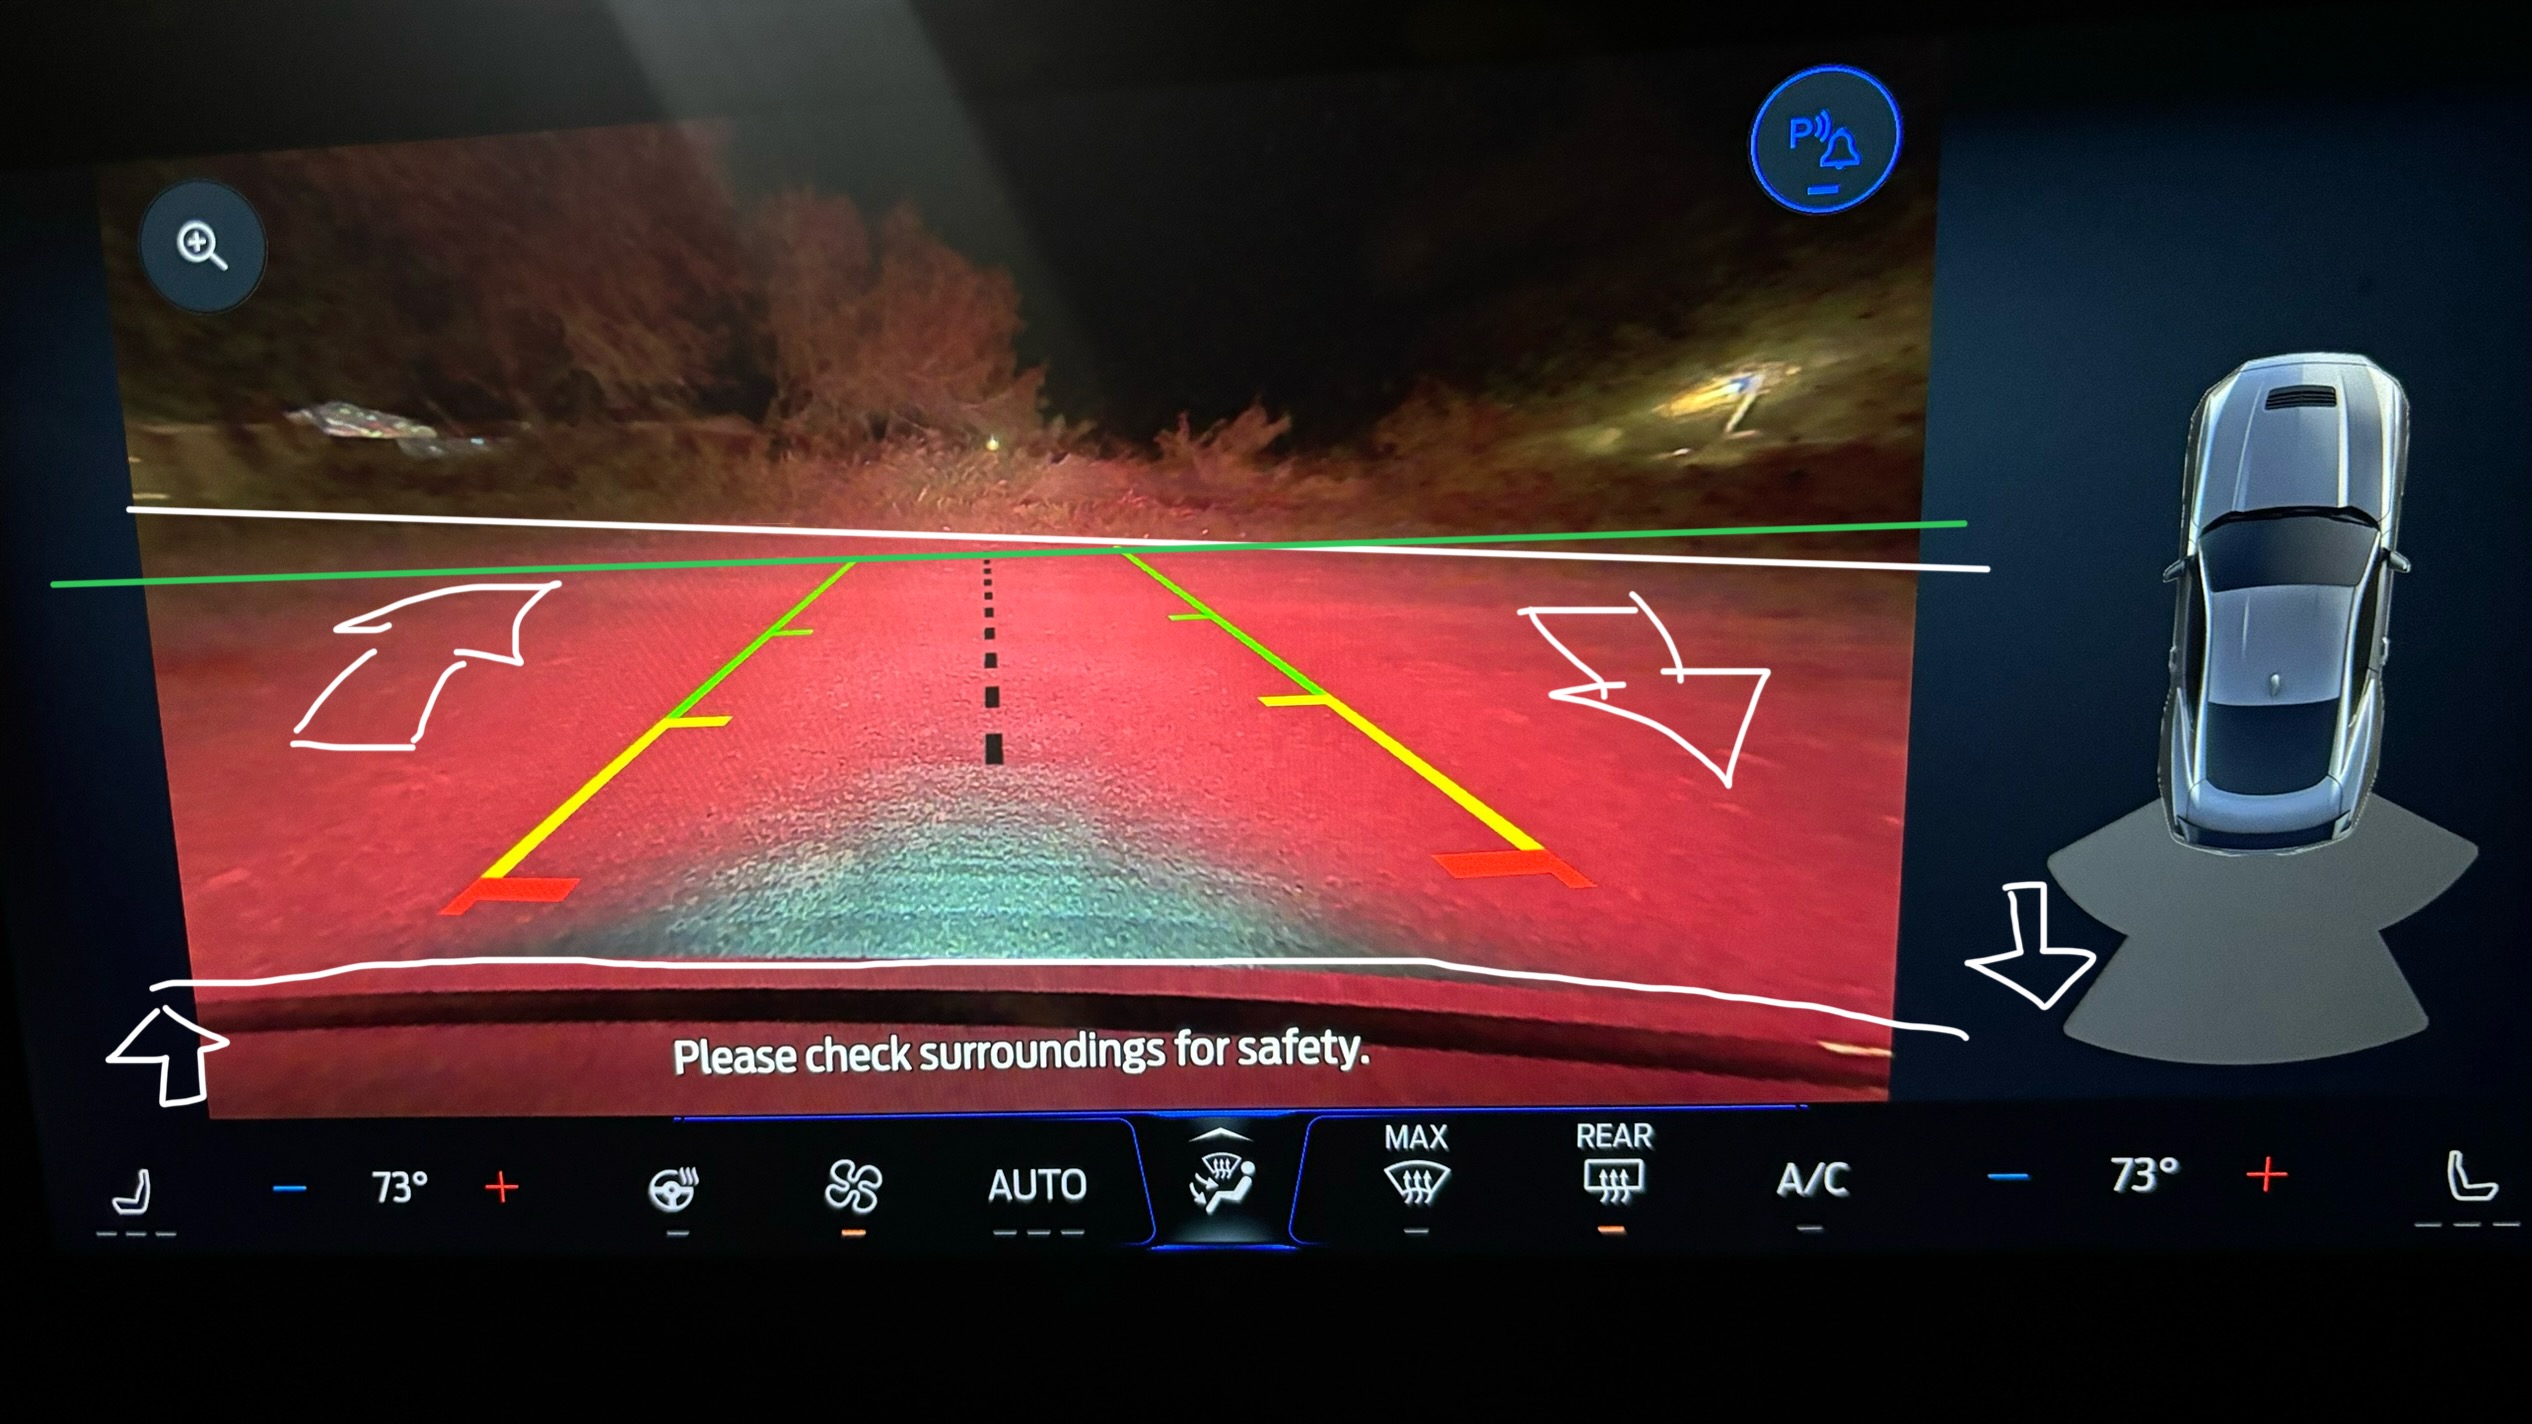 S650 Mustang Rear view camera issue IMG_9370